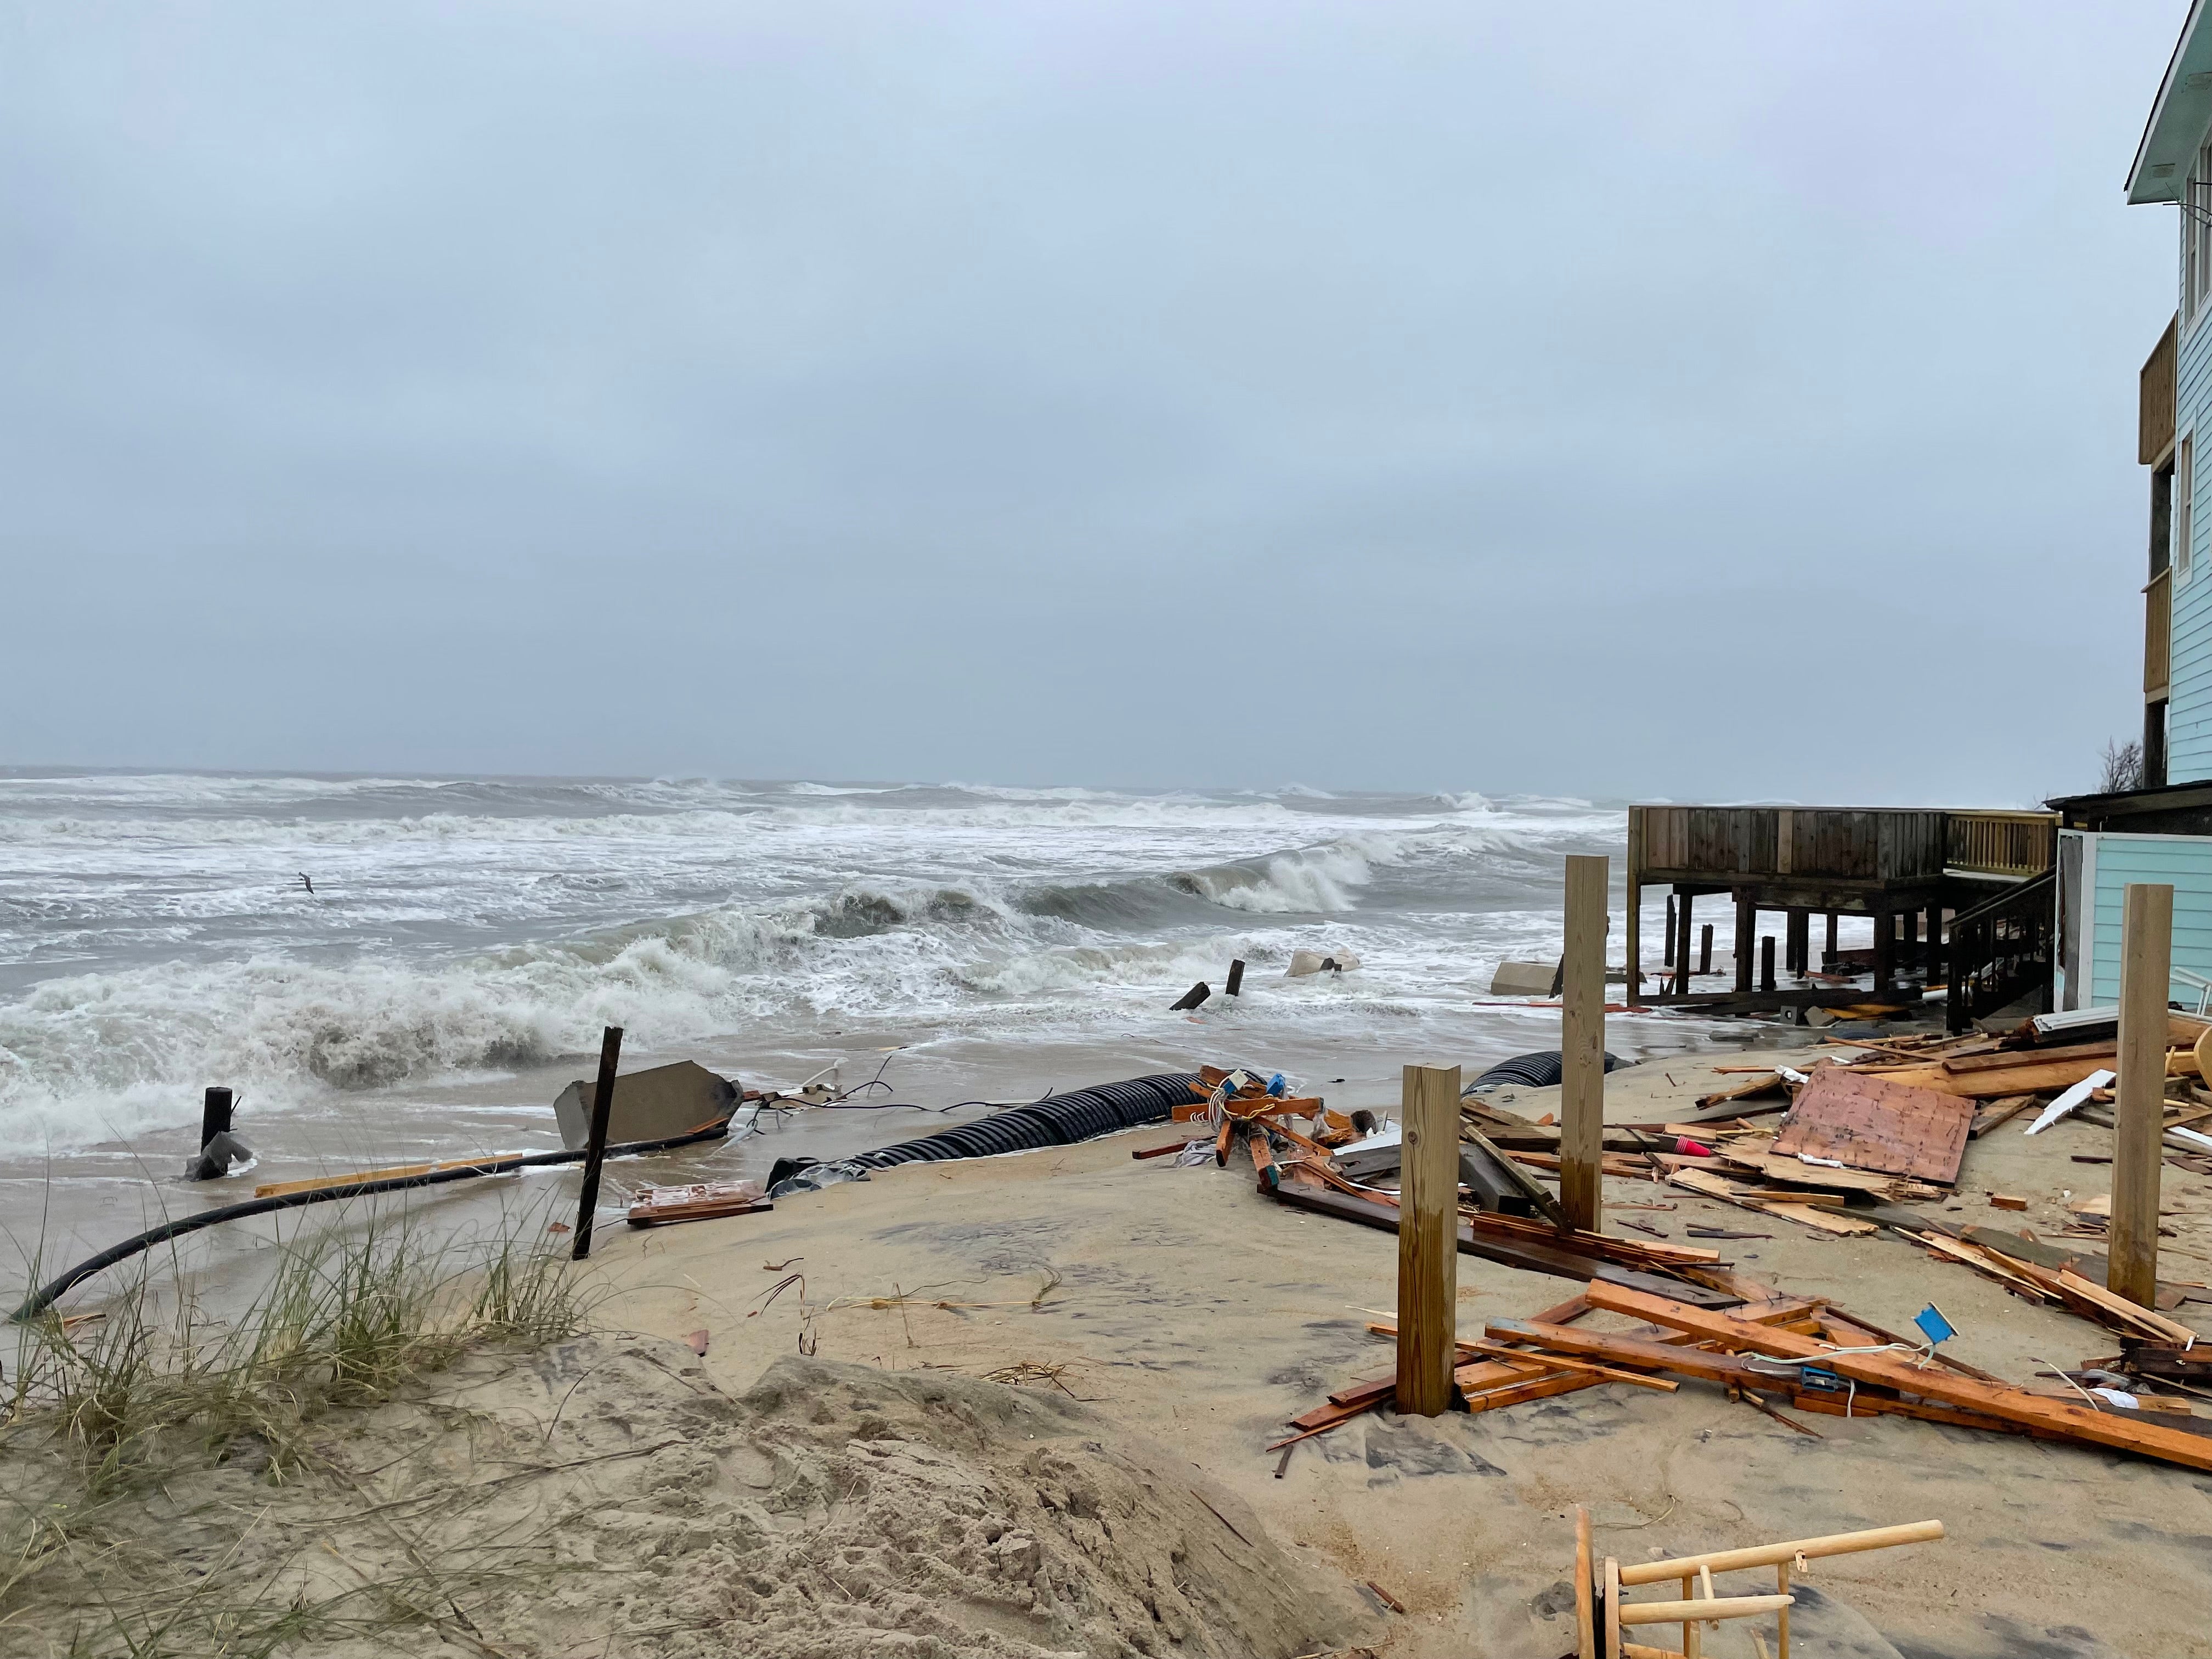 In the aftermath of the house collapses, the beaches are closed for cleanup. Extensive debris, including electrical wiring and septic tank piping, litters the shoreline. (Photo: Cape Hatteras NPS / National Park Service, Fair Use)